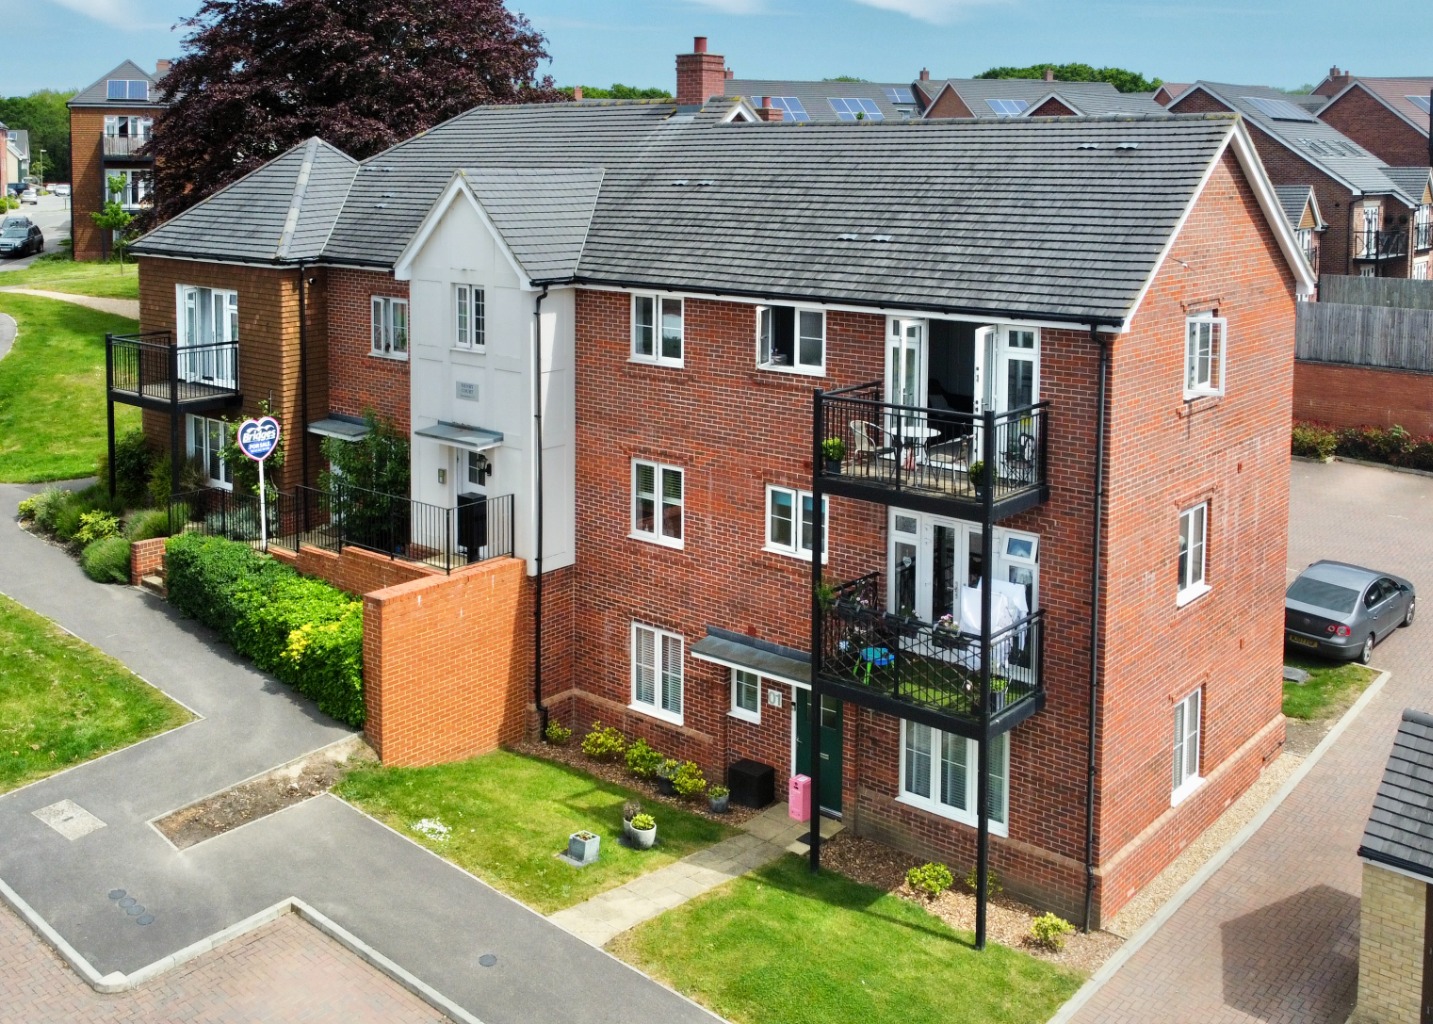 NO CHAIN!!! This is a beautifully located top floor apartment with balcony views set within the highly desirable Crookham Park development. Also included is a large garage that can fit both a car and motorbike, in addition to allocated and visitor parking bays. ..